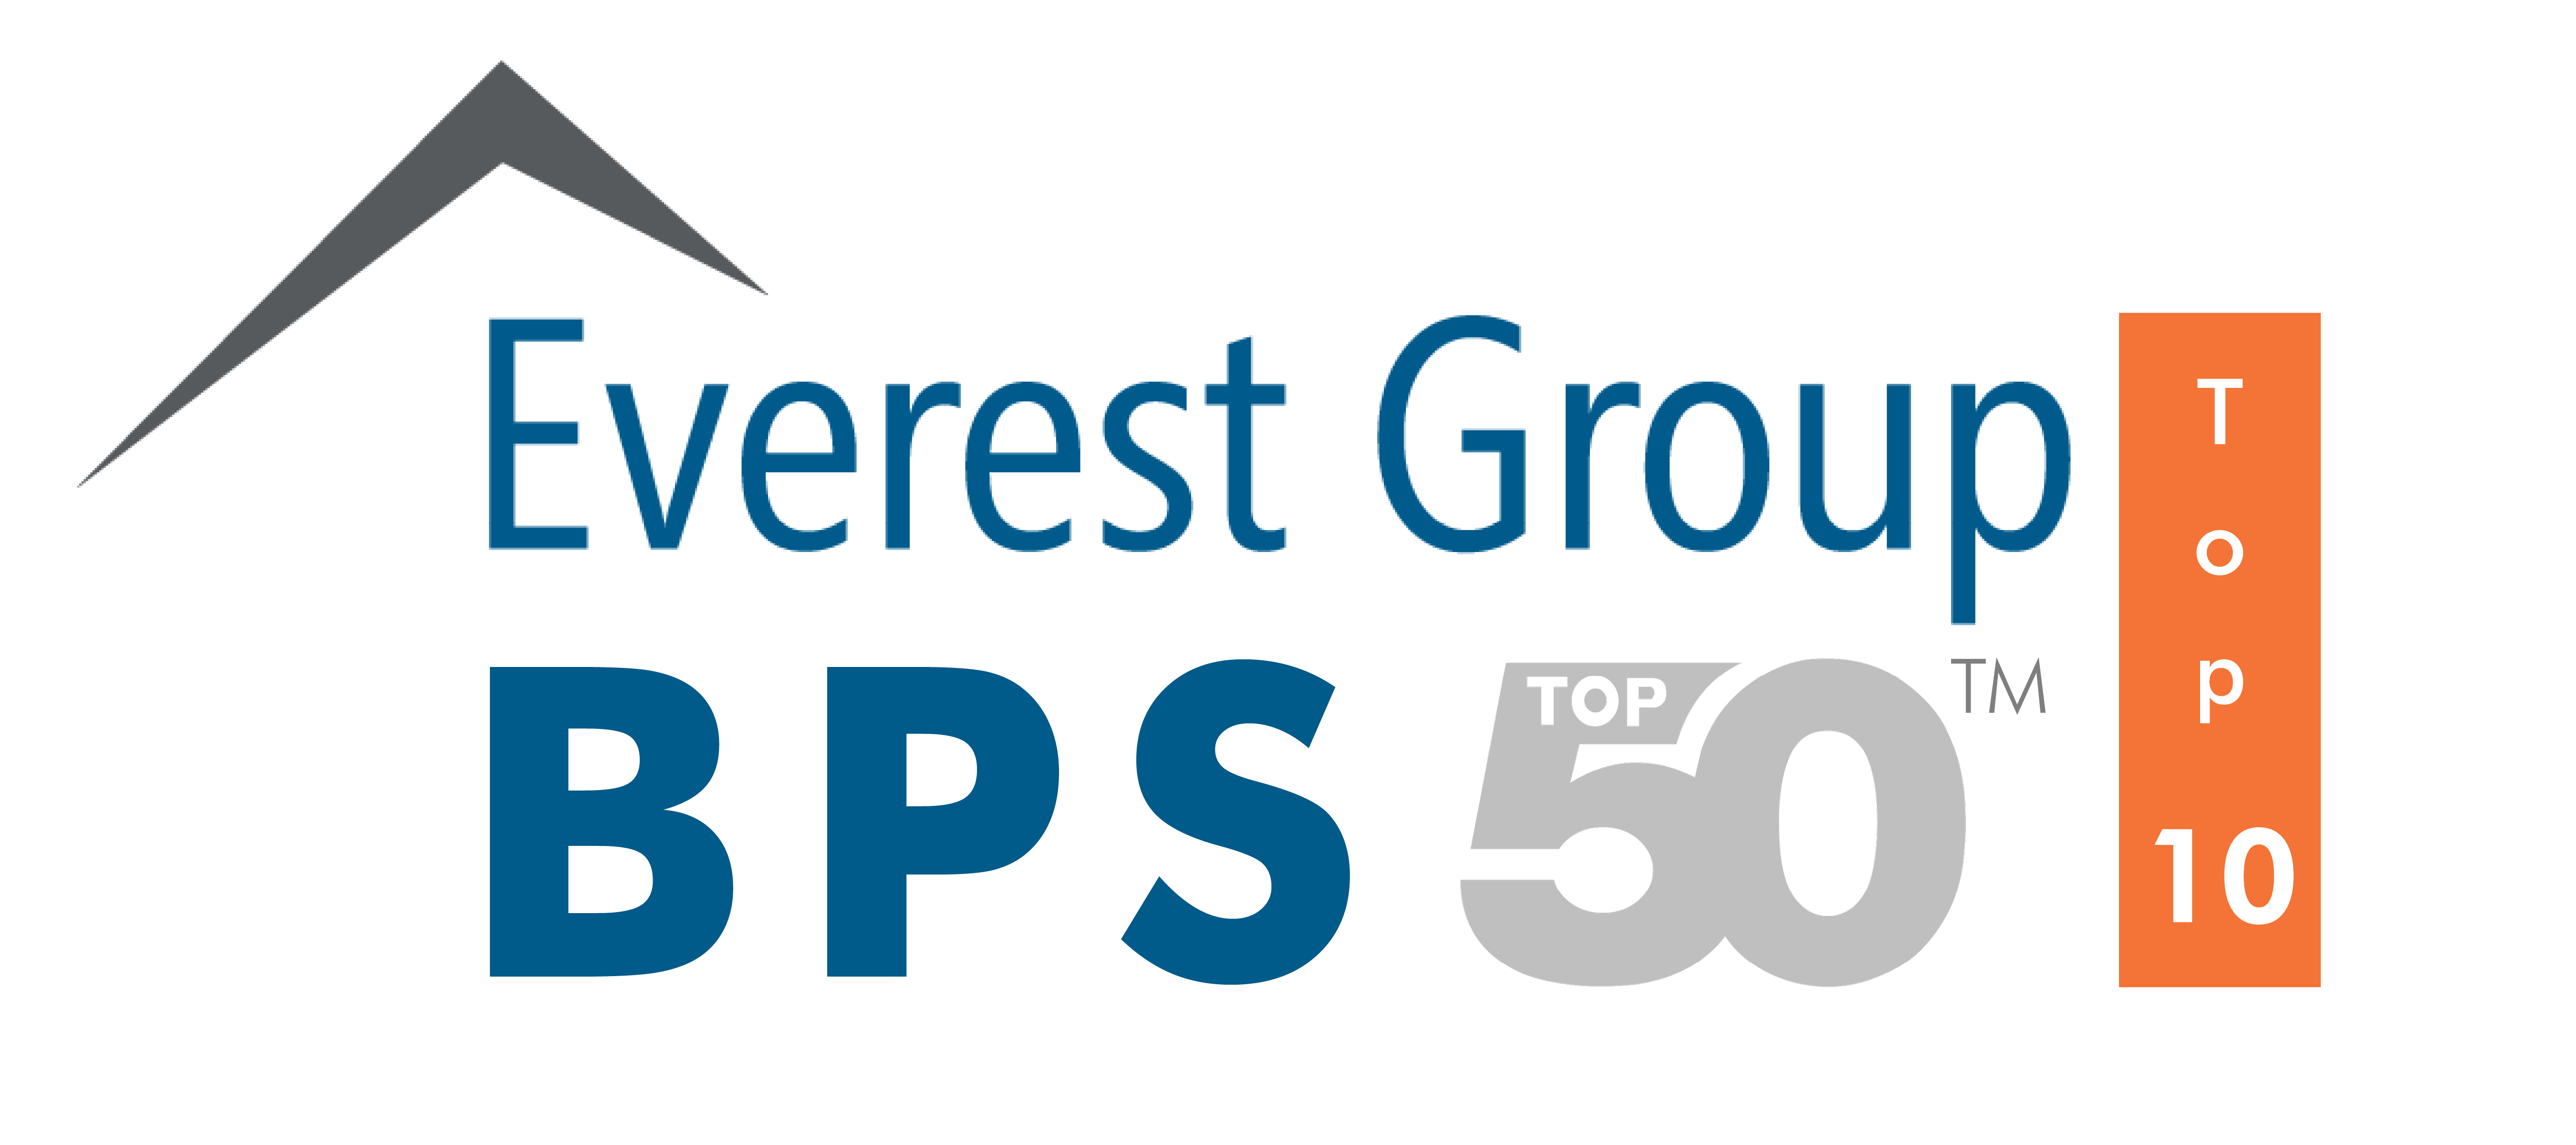 Everest Group Top 10 BPS